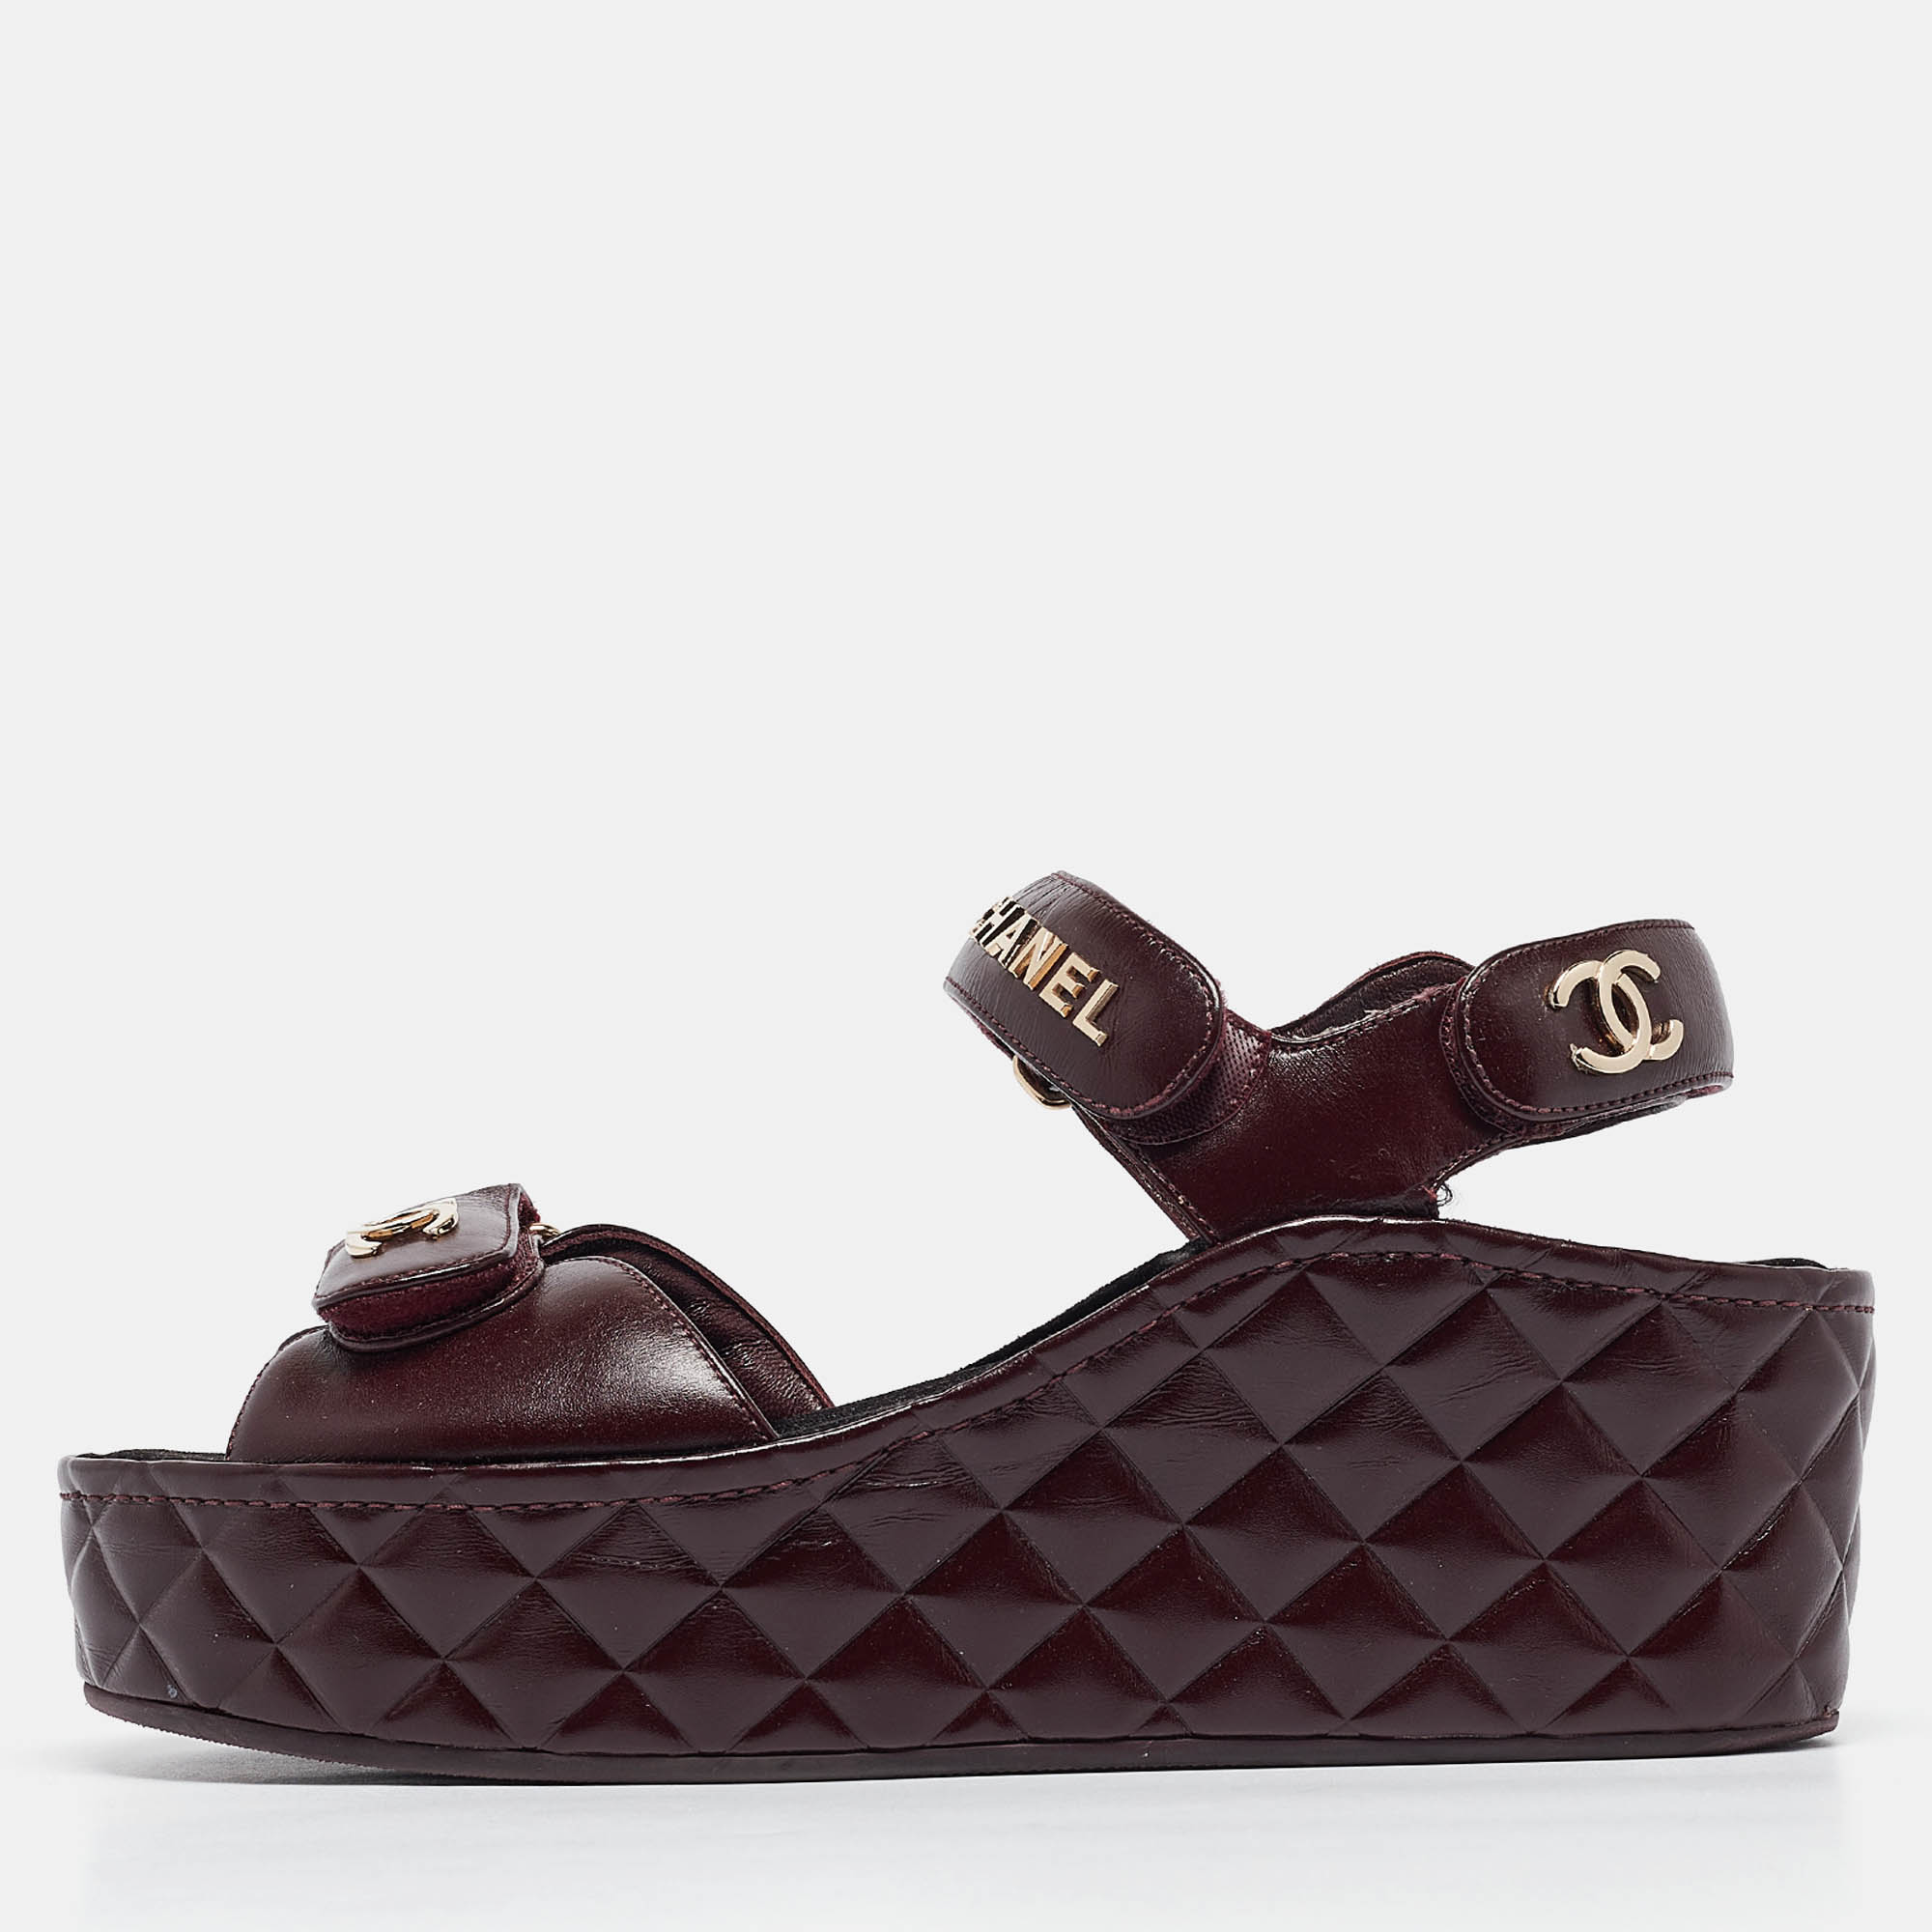 

Chanel Burgundy Leather CC Quilted Wedge Platform Sandals Size